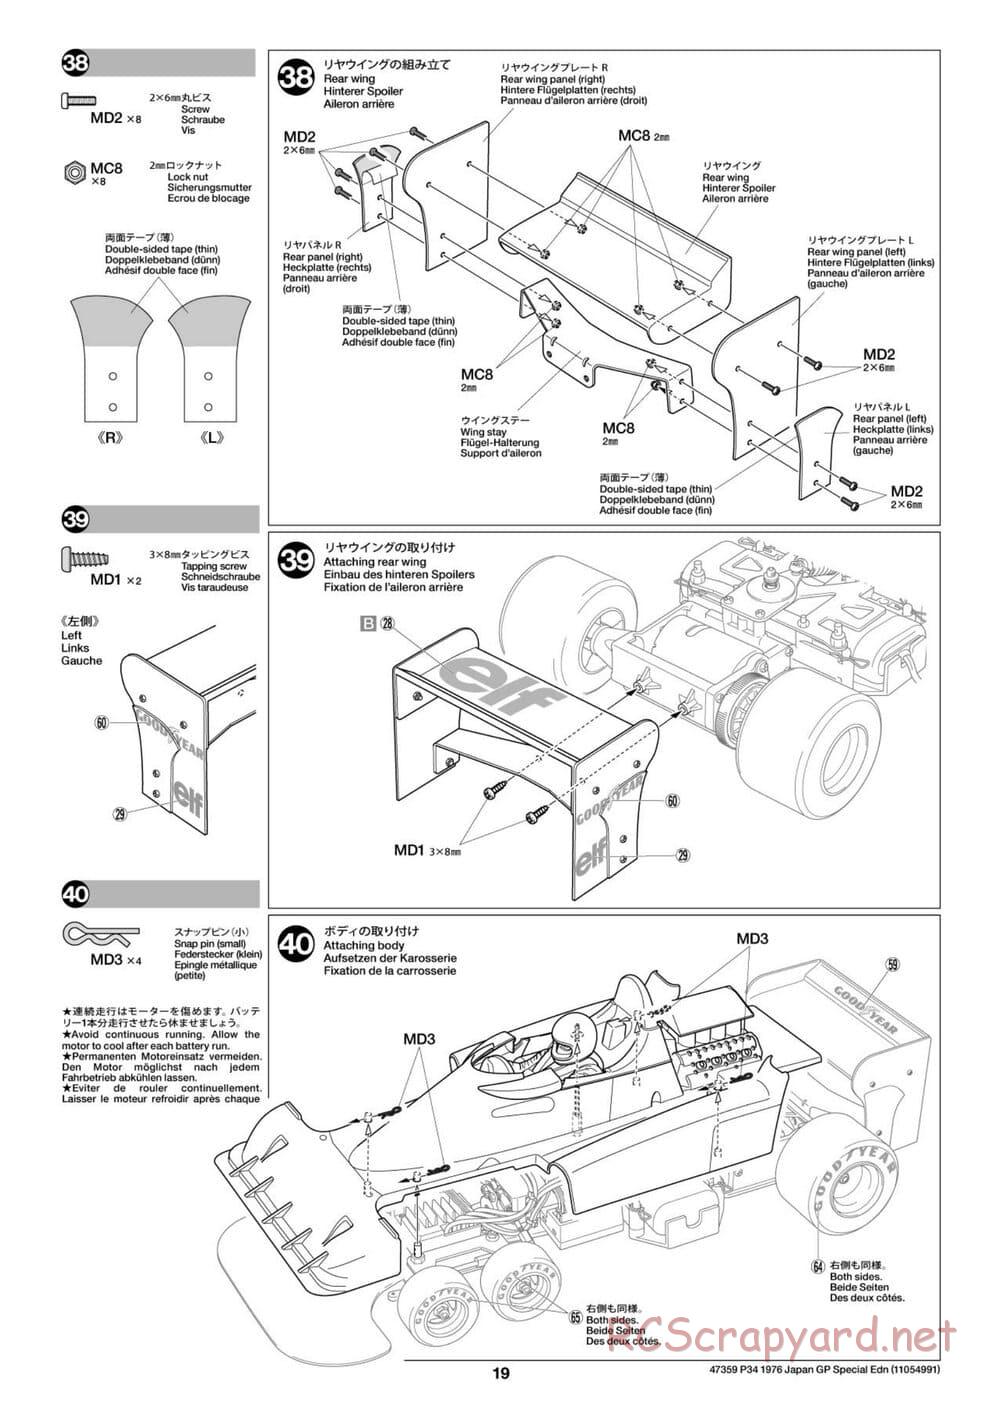 Tamiya - Tyrrell P34 1976 Japan Grand Prix Special - F103-6W Chassis - Manual - Page 19